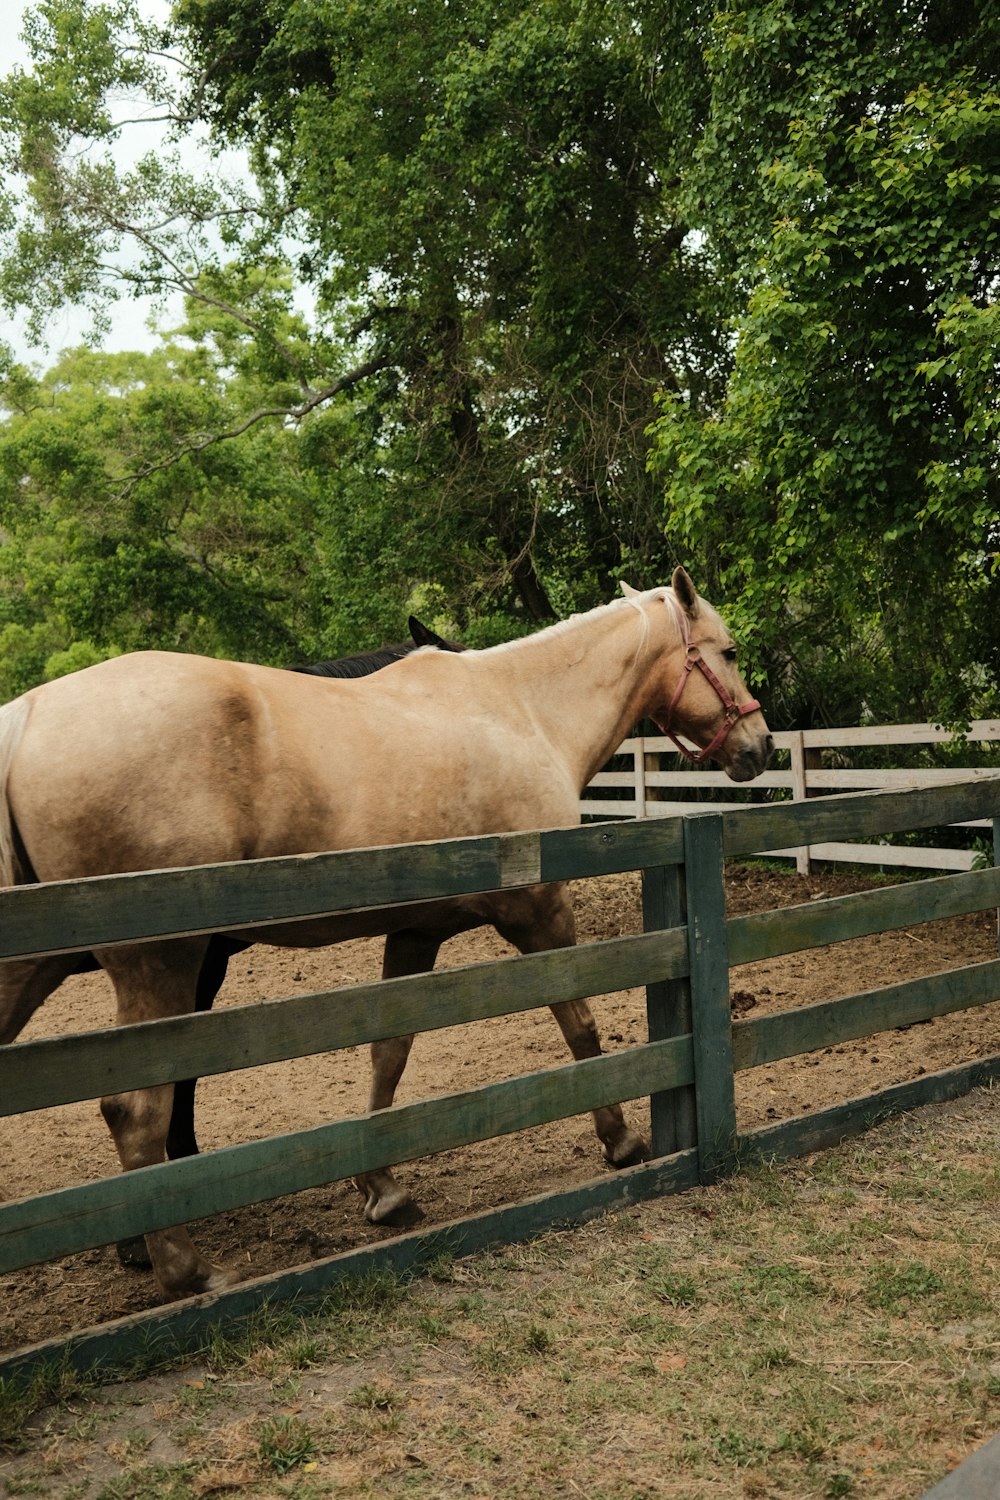 a horse walking in a fenced in area